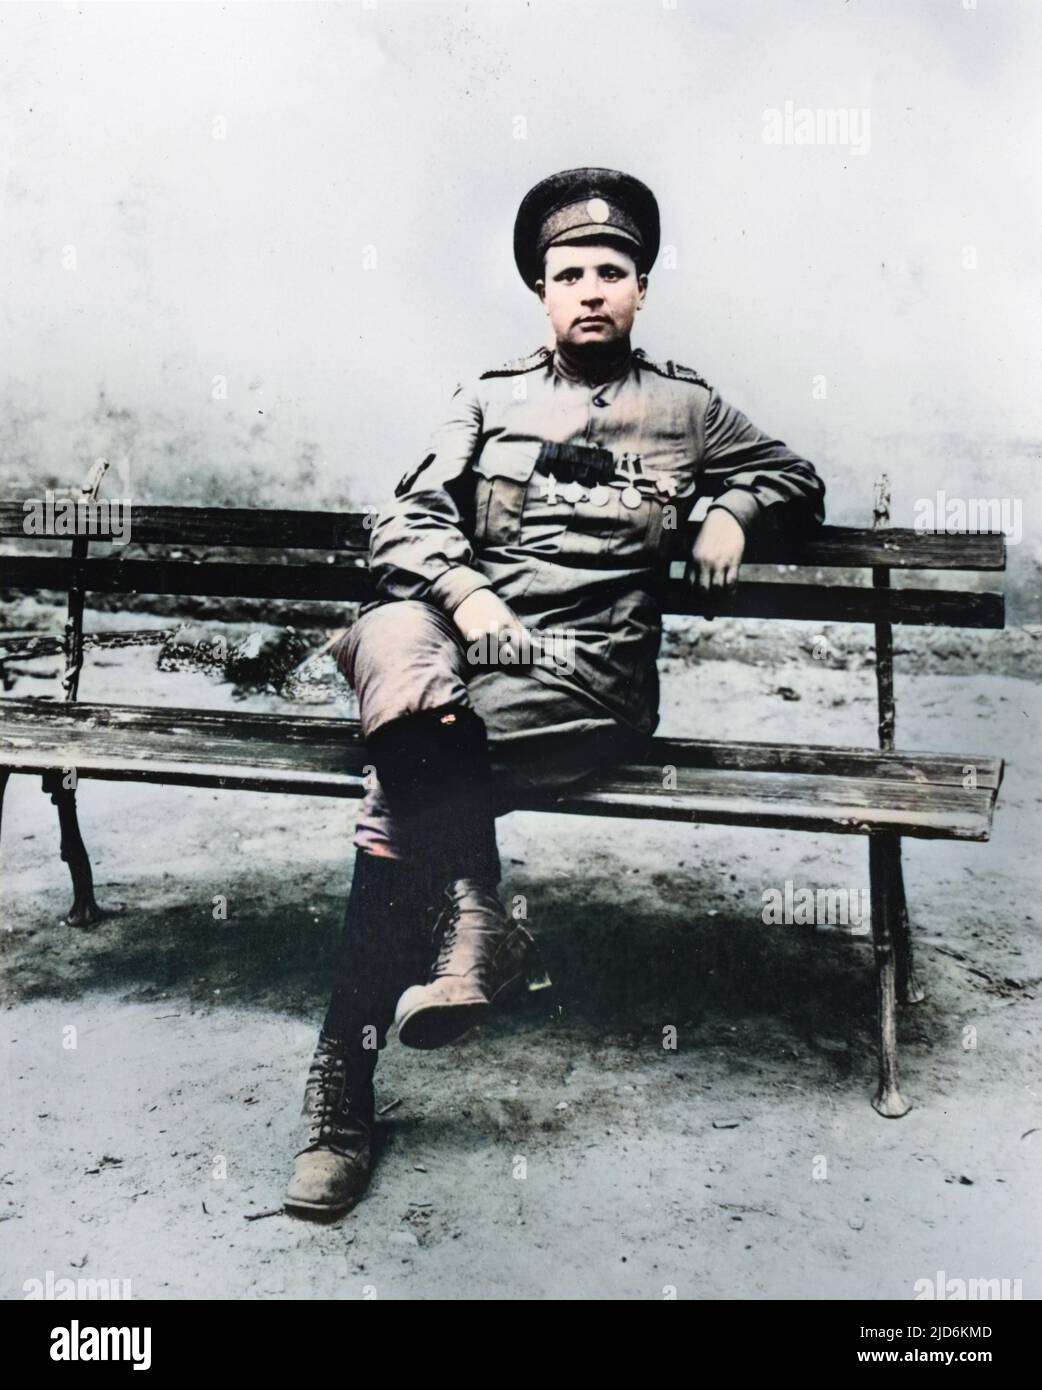 Maria Leontievna Bochkareva (nee Frolkova),  who fought in World War I and formed the First Russian Women's Battalion of Death in 1917.  Seen here in uniform in 1917, with her medals on display, sitting relaxed on a bench with her legs crossed. Colourised version of: 10294461       Date: 1889 - 1920 Stock Photo